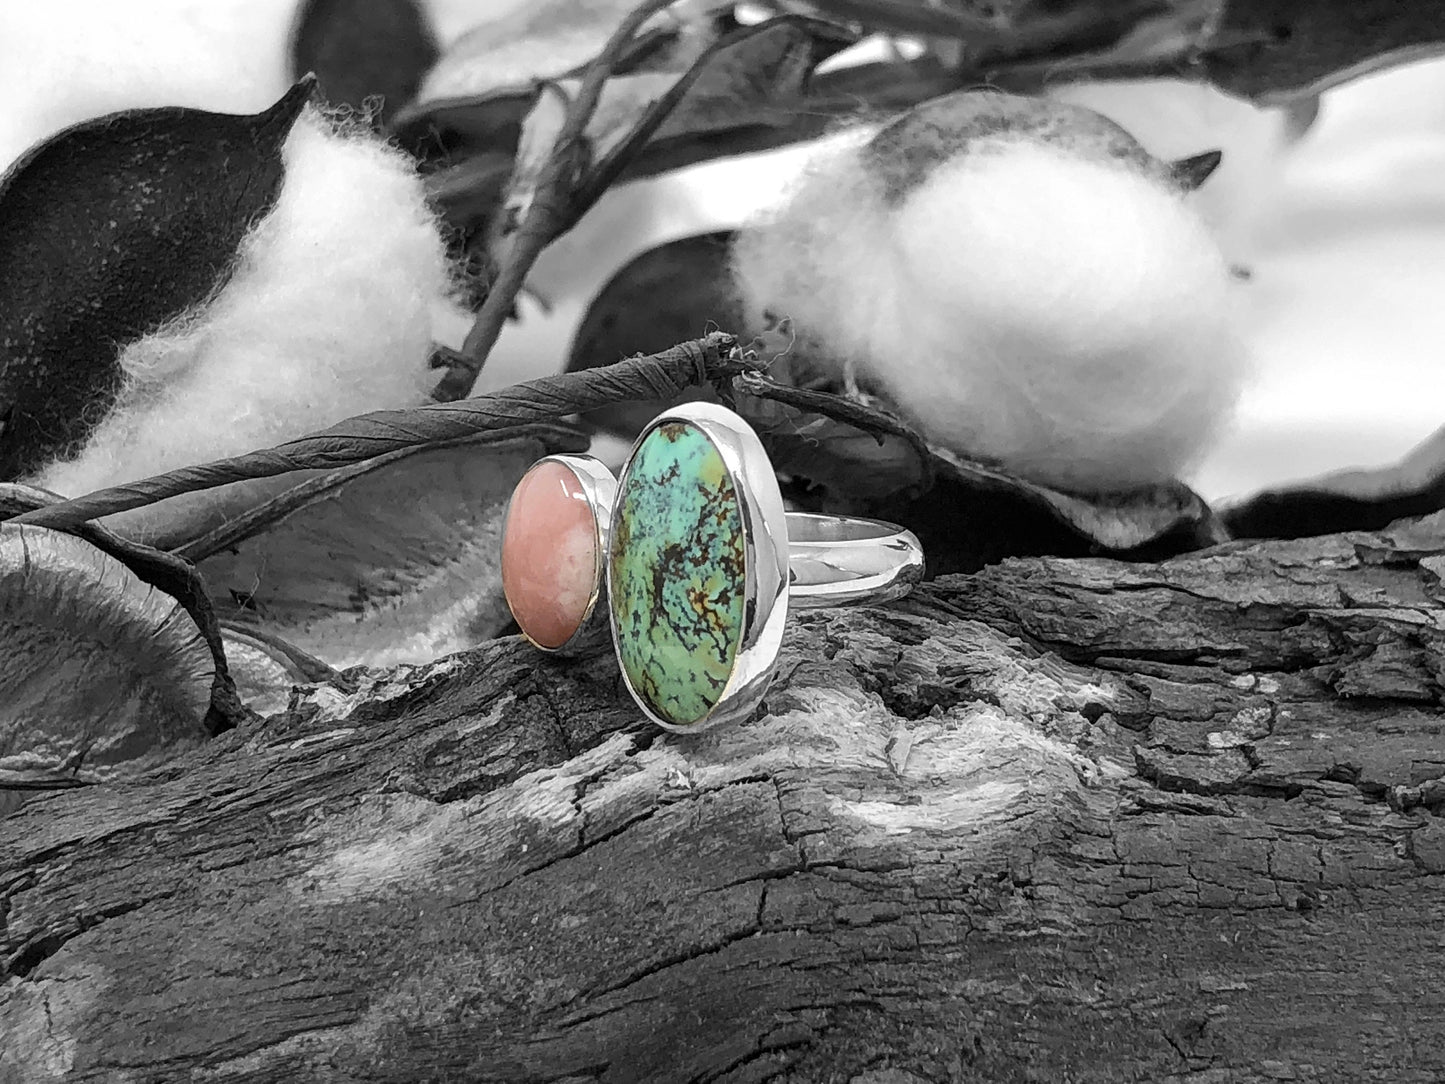 Turquoise and Pink Peruvian Opal Ring Size 7